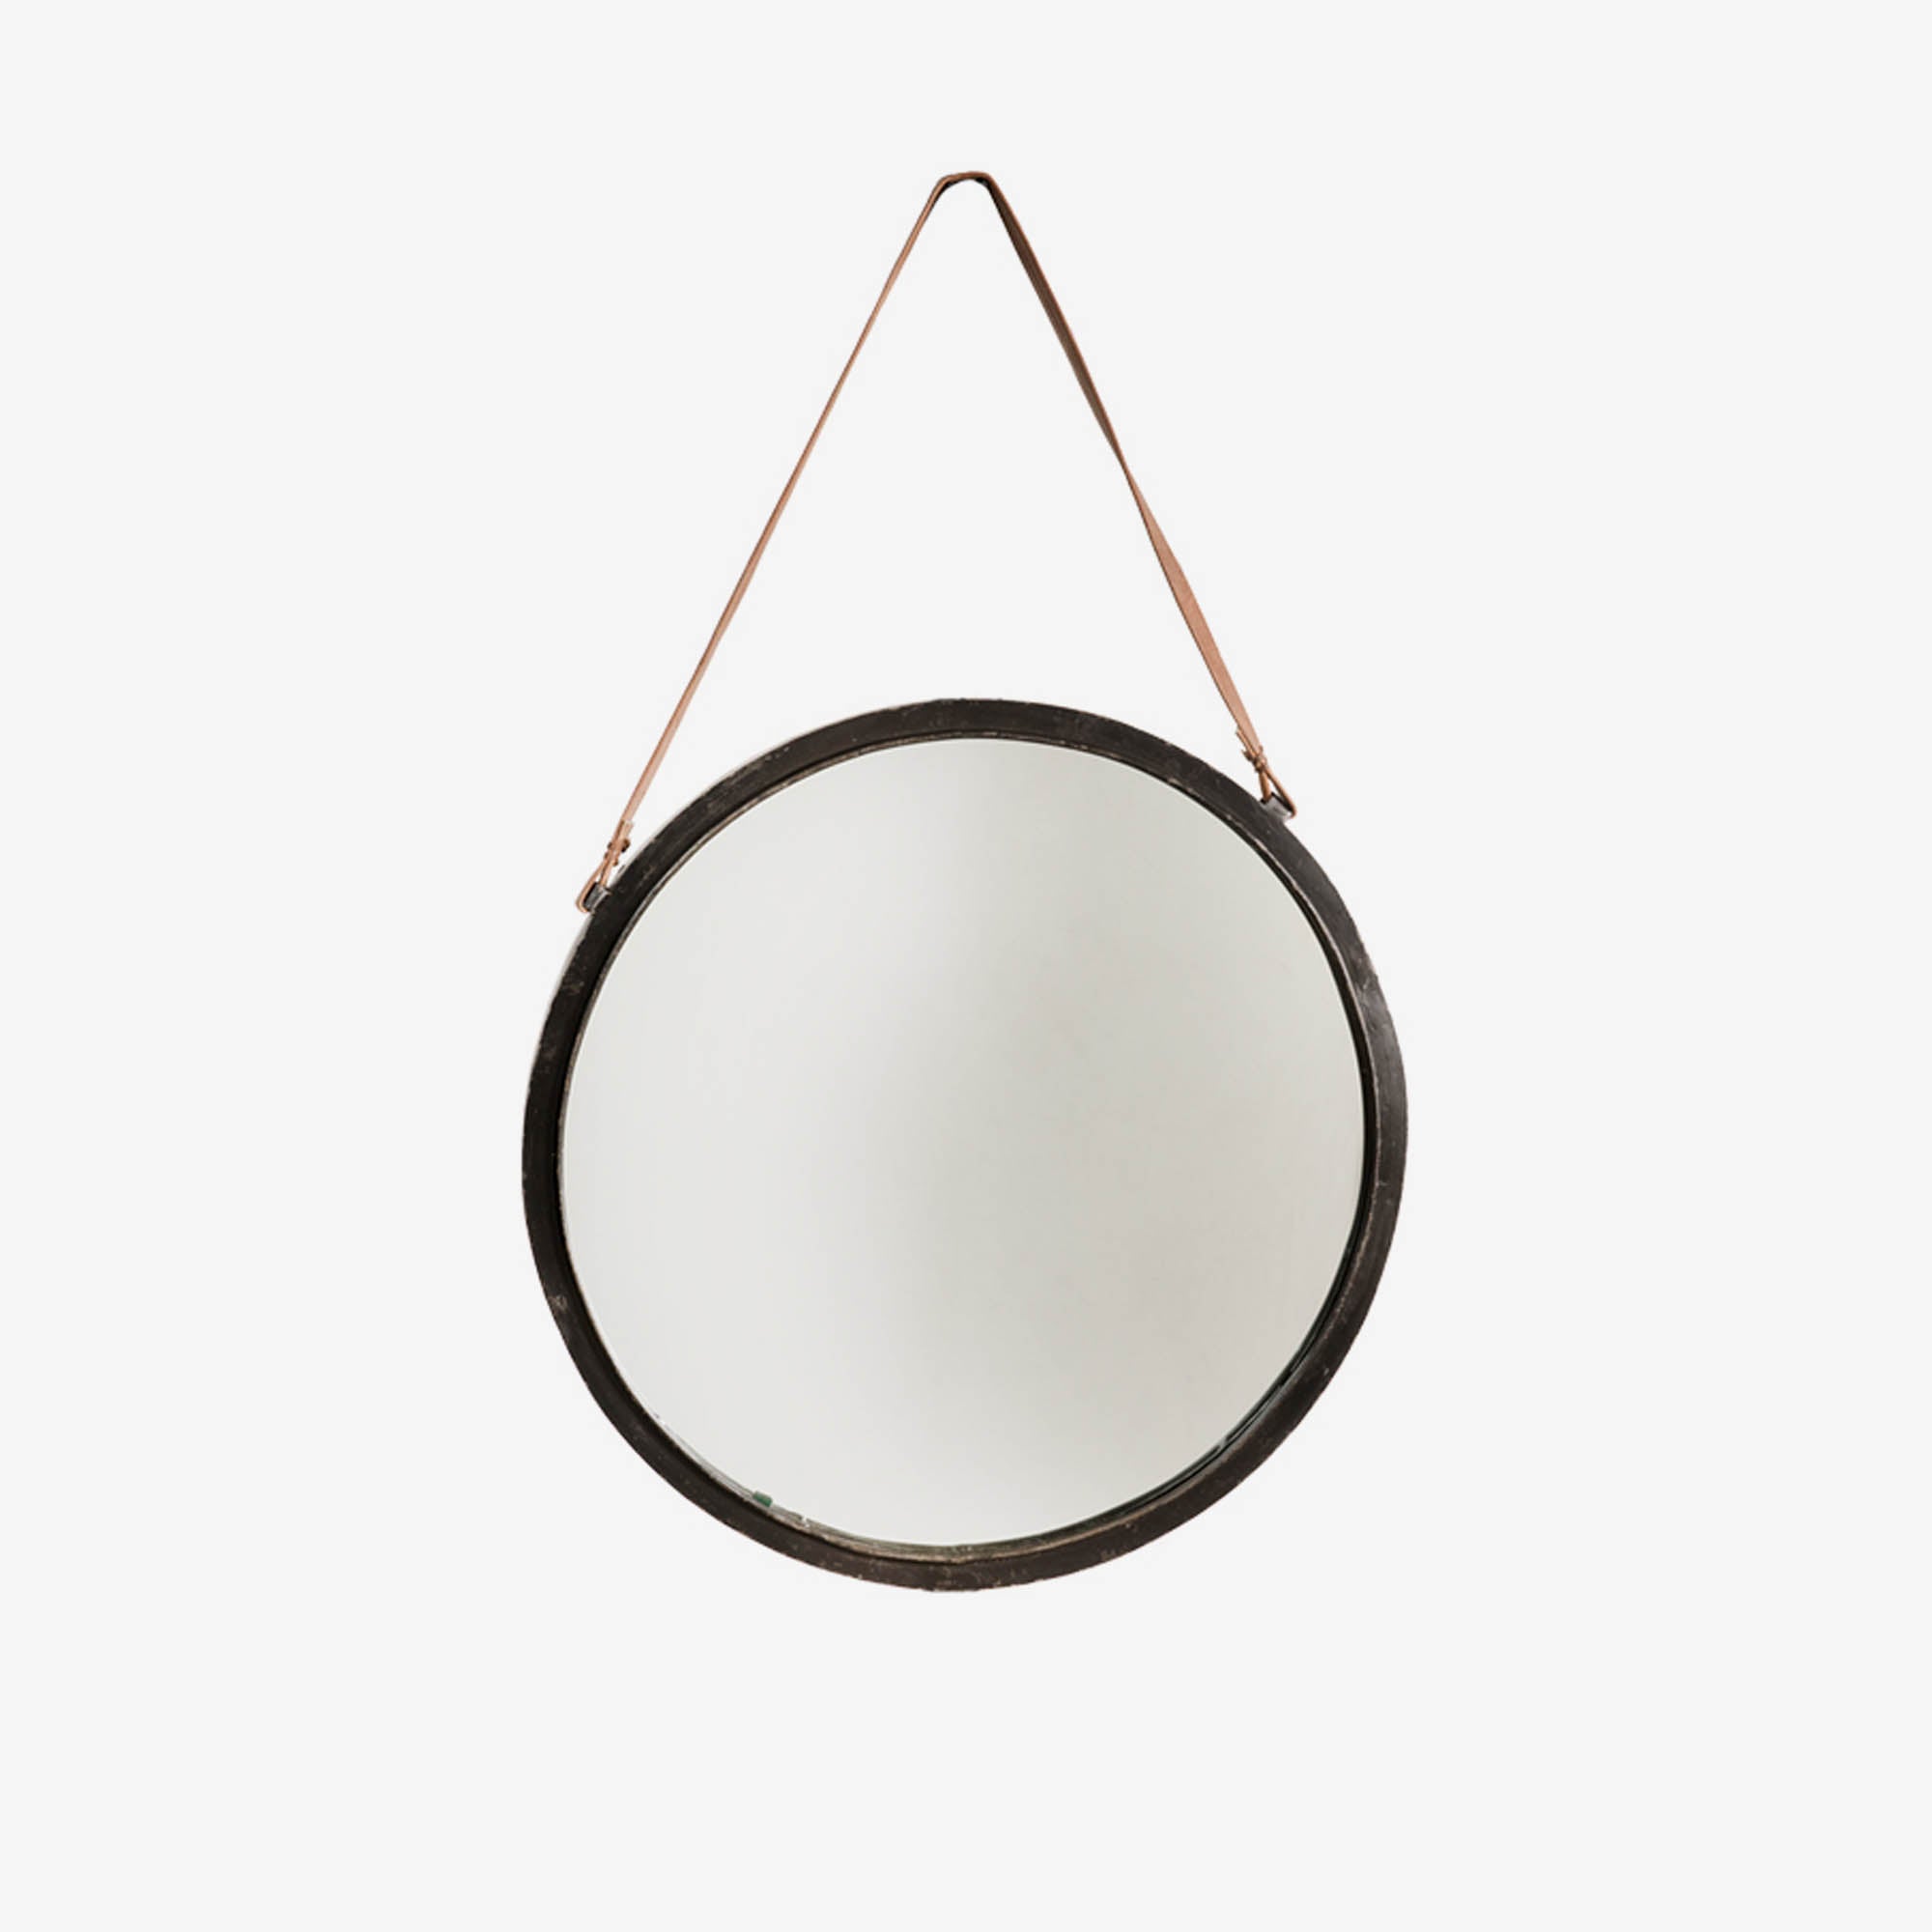 Mirror with leather cord